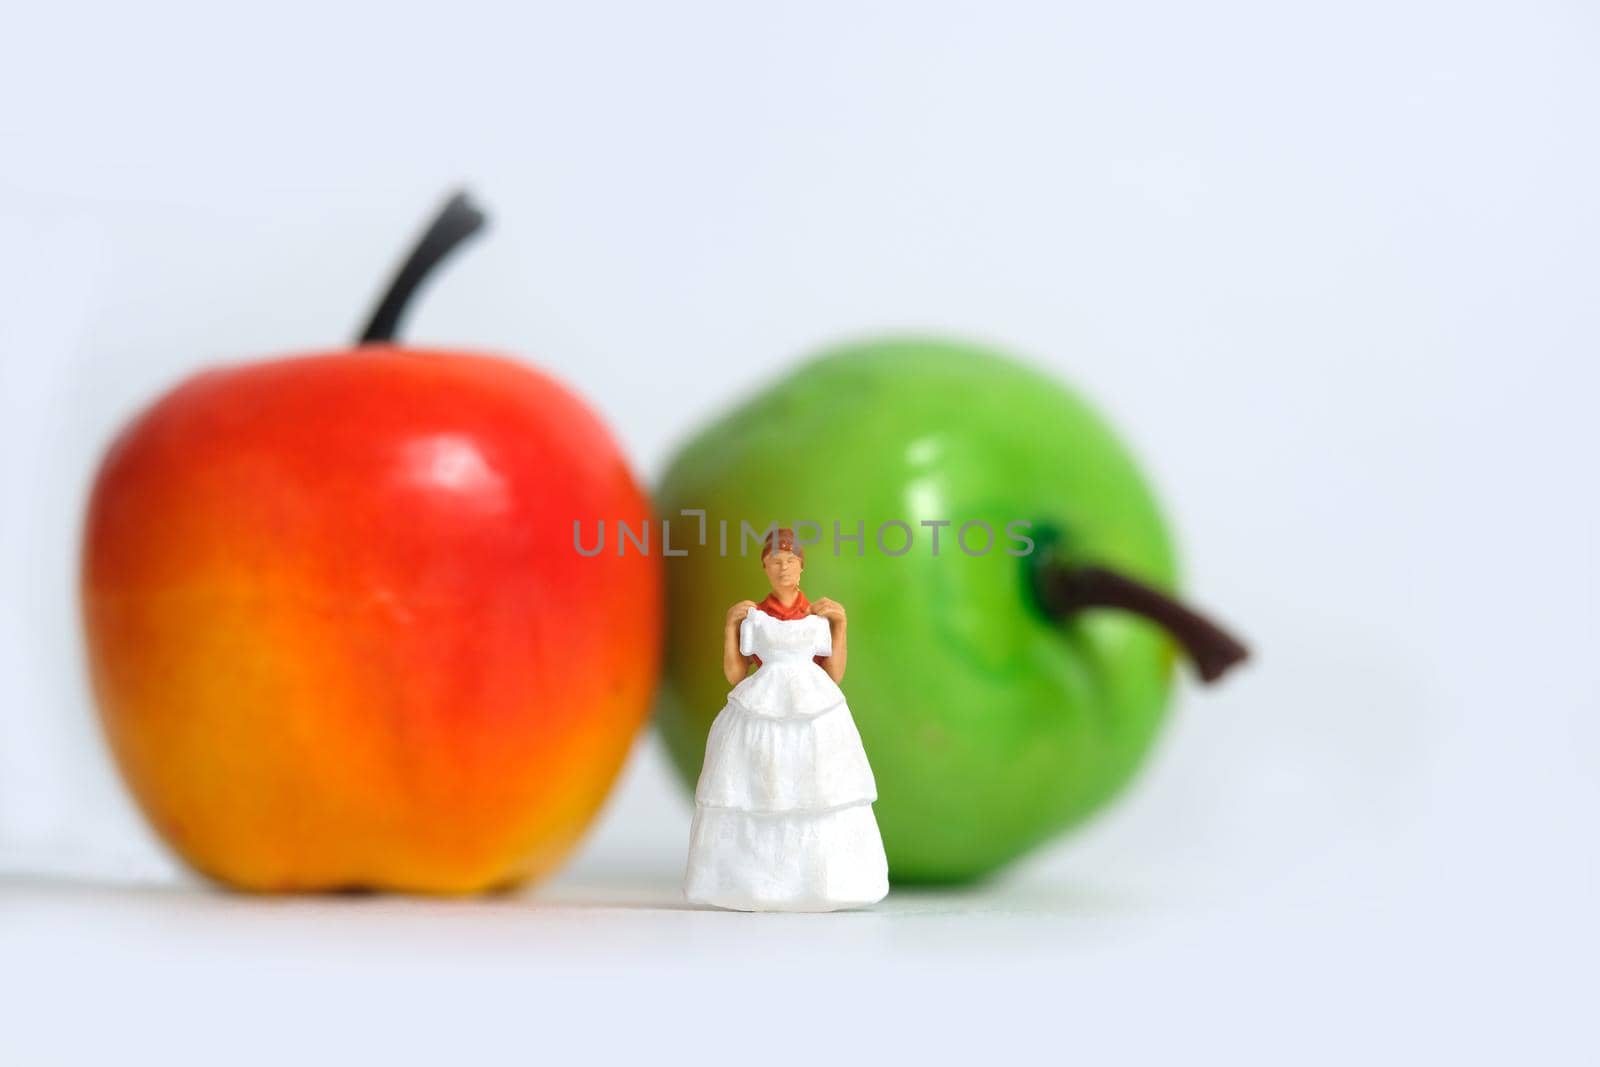 Diet plan before wedding or marriage day concept. Woman standing in front of apple with trying wedding dress. Miniature people, toys photography.